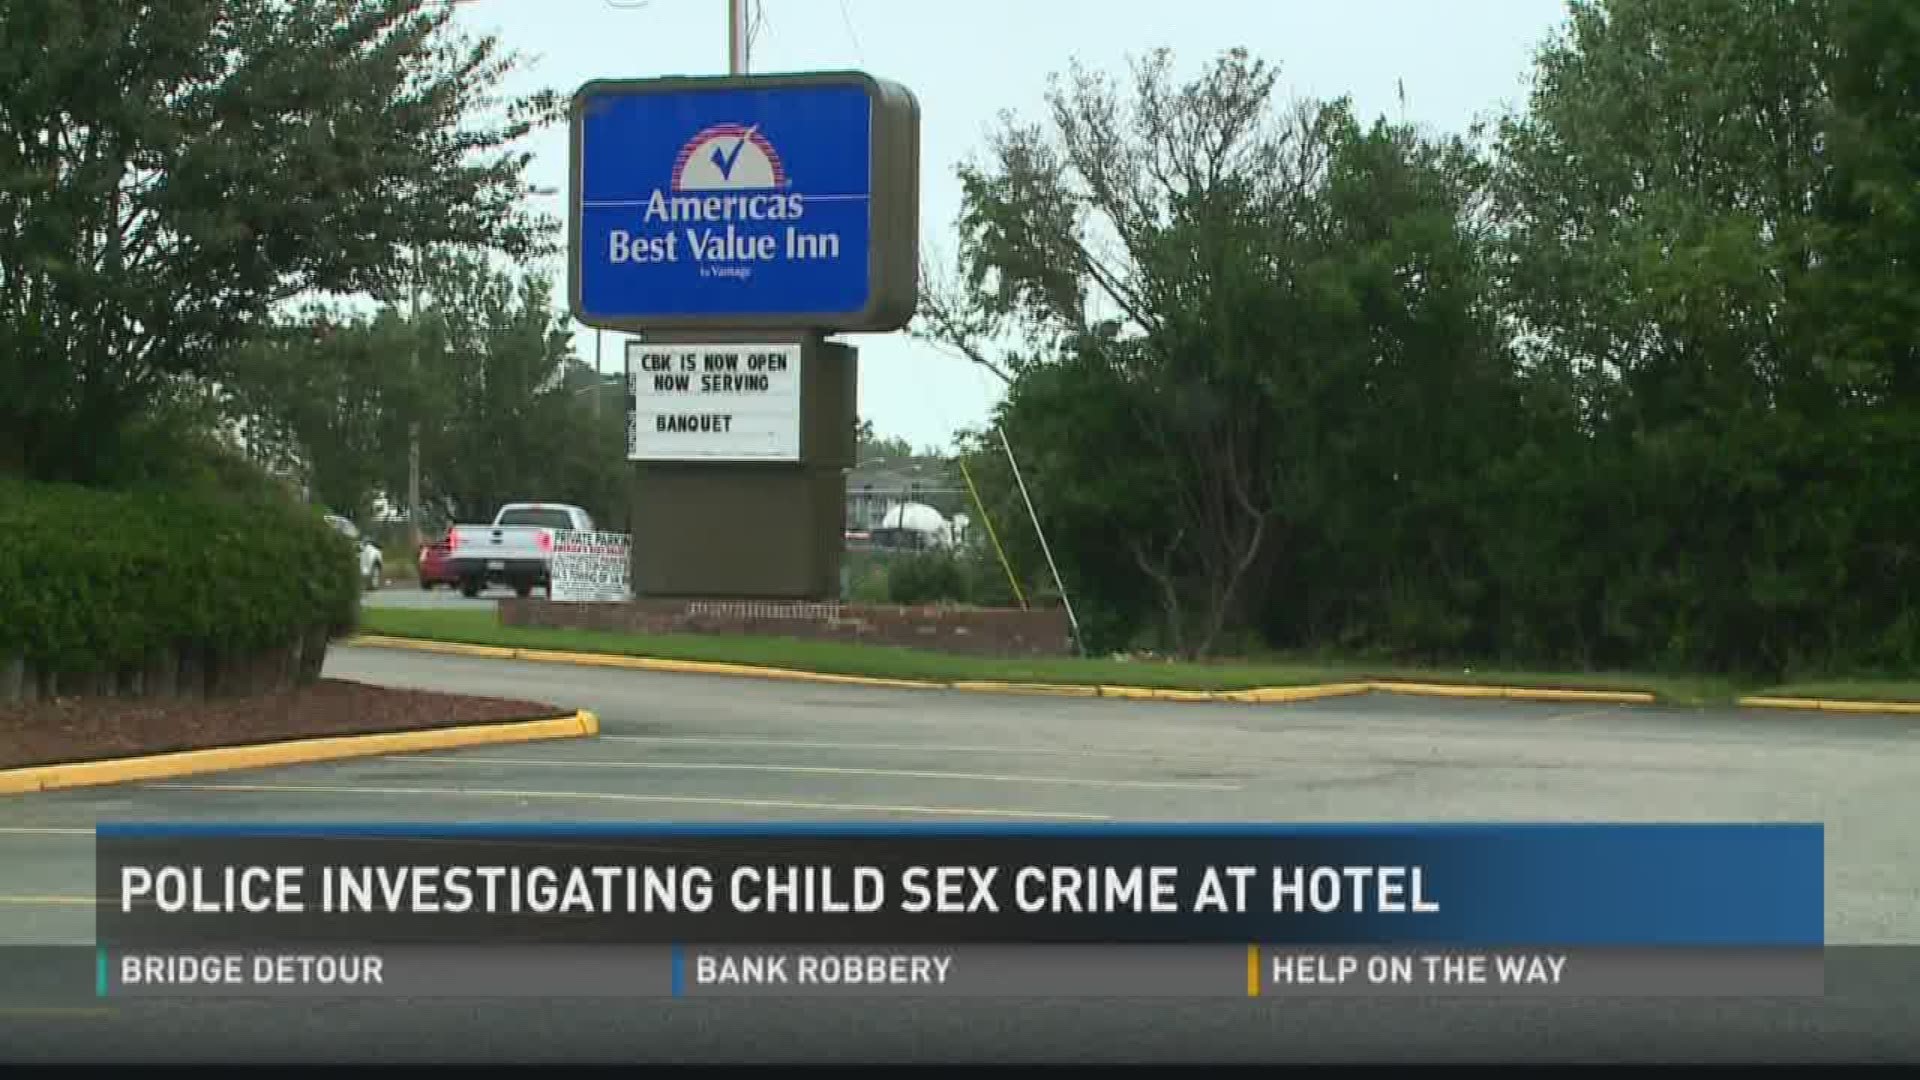 Police And Criminal Sex Hd Videos - Virginia Beach Police investigating child porn at area hotel | 13newsnow.com